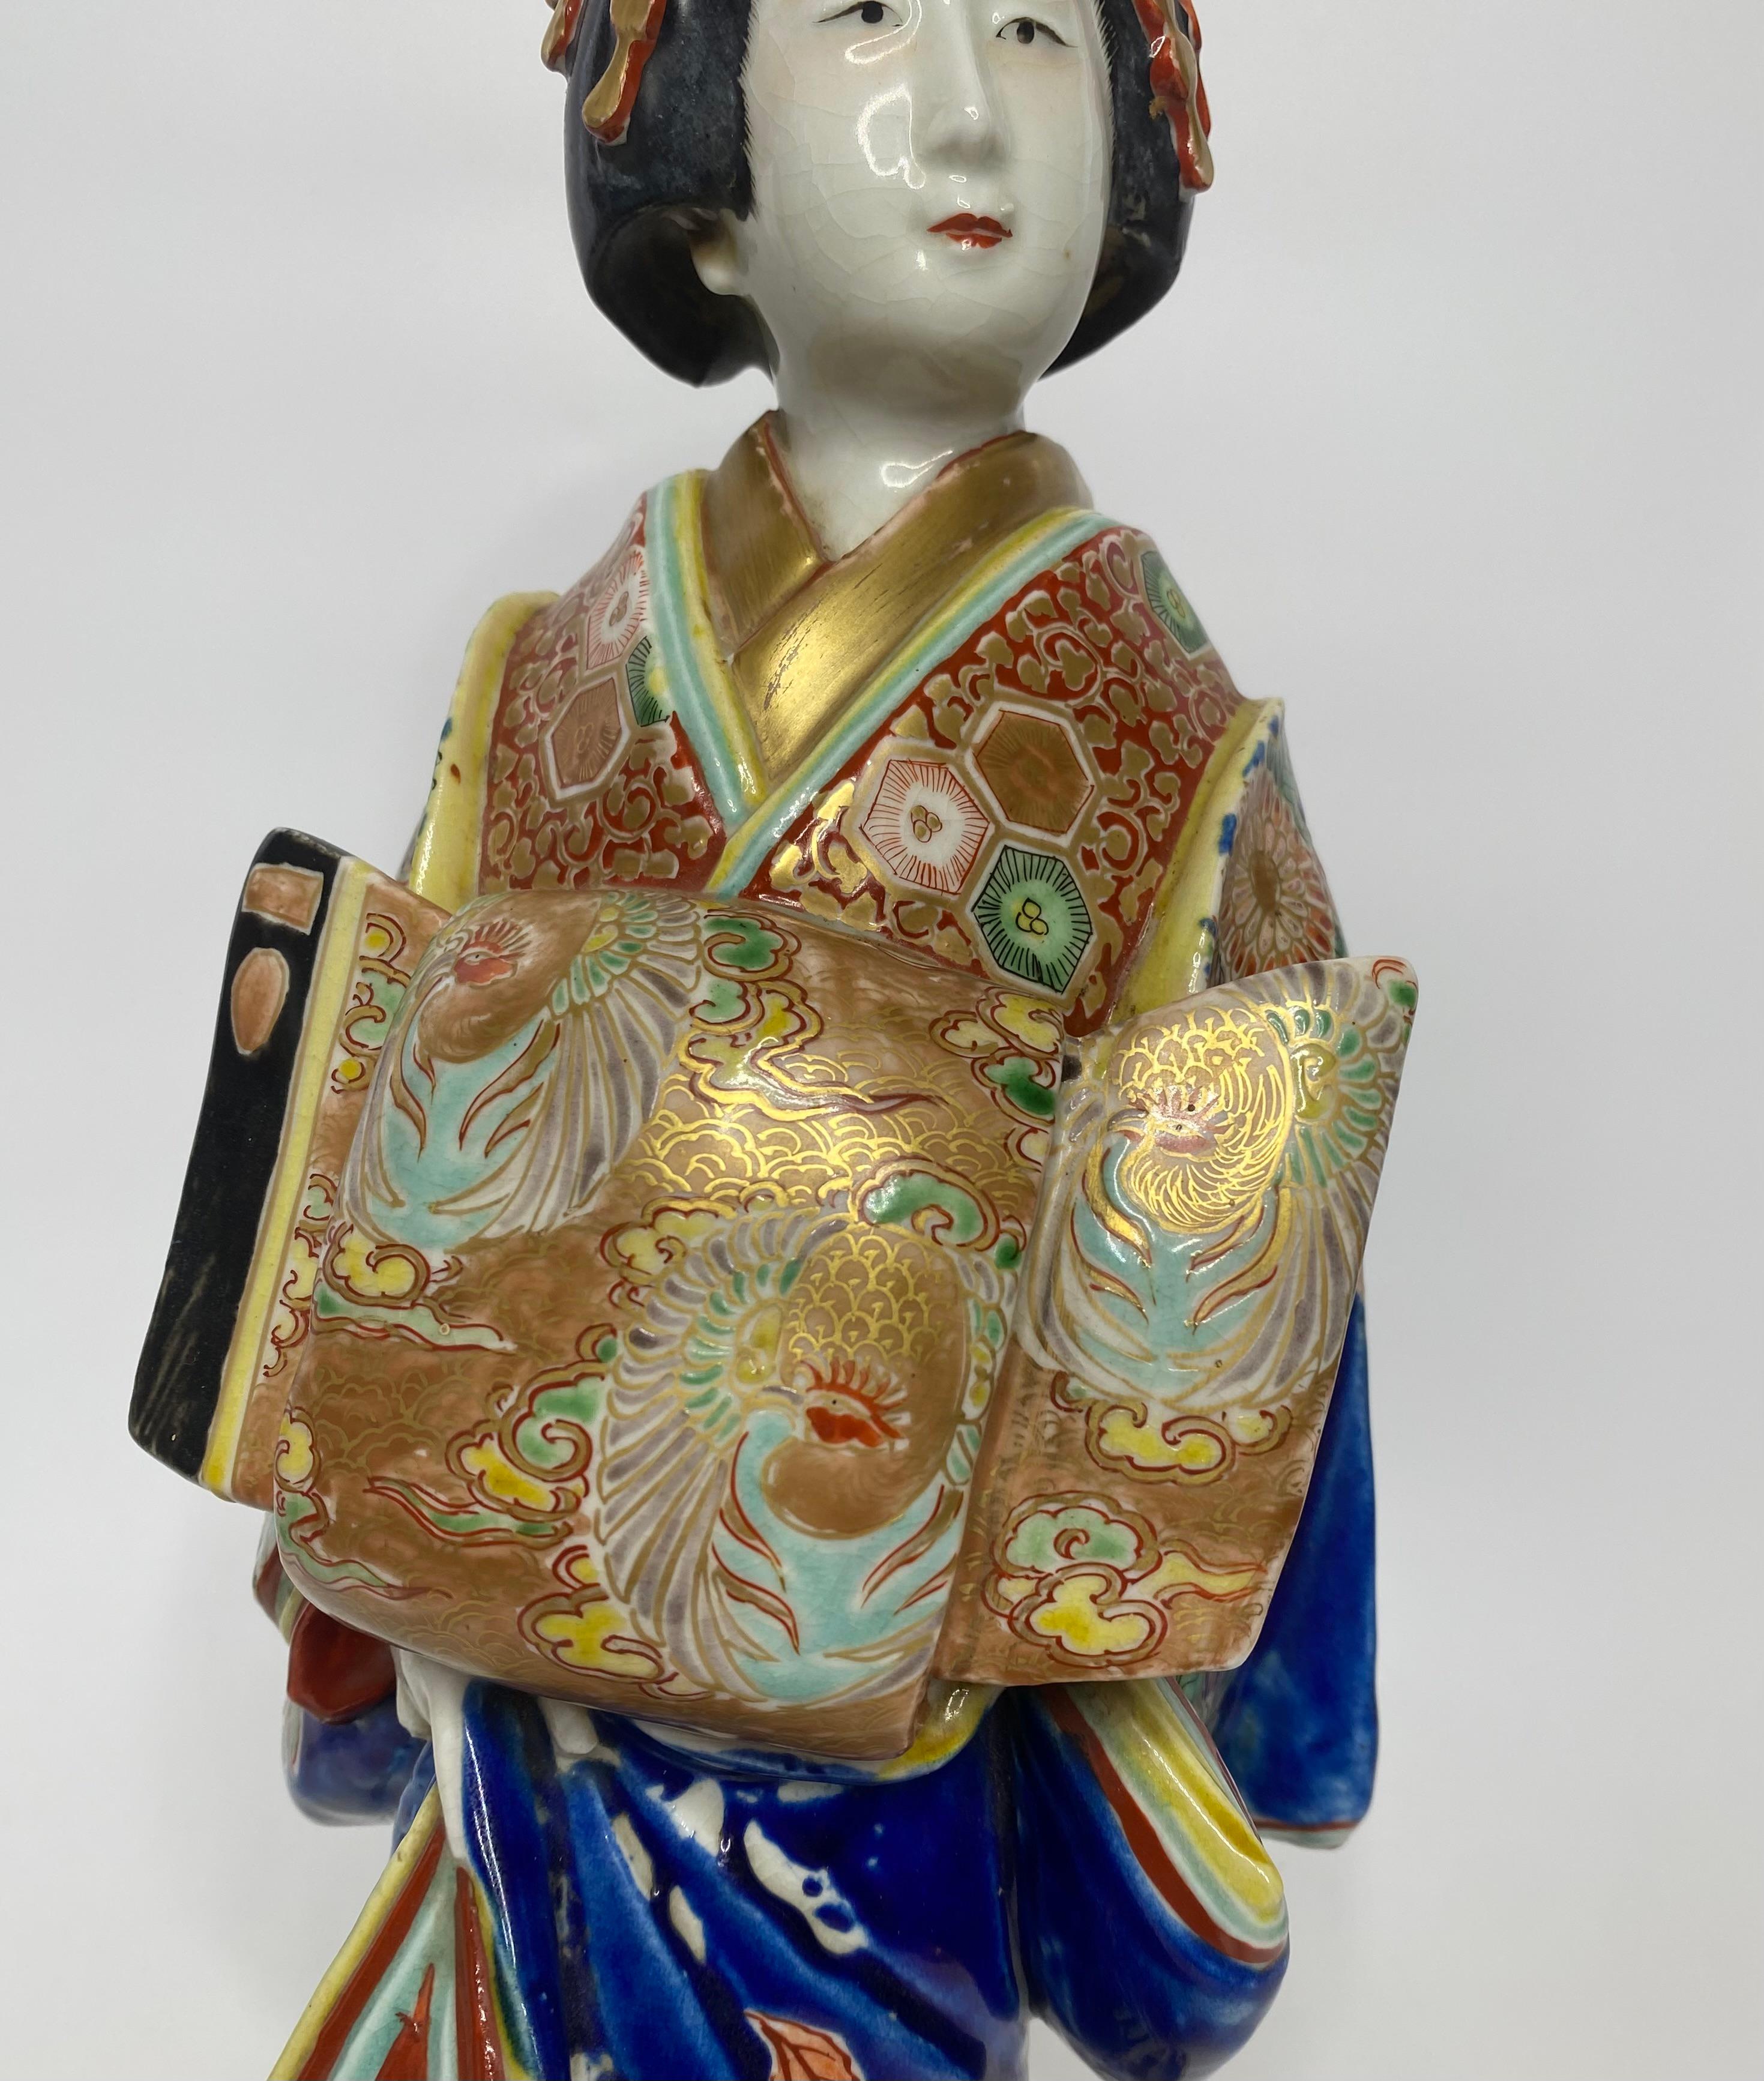 Kutani porcelain Bijin of large size, Japan c. 1900, Meiji Period. The Bijin, wears beautifully decorated traditional costume, the obi particularly well painted with phoenix on a gilt ground.
Her hair held in place with a complex arrangement of